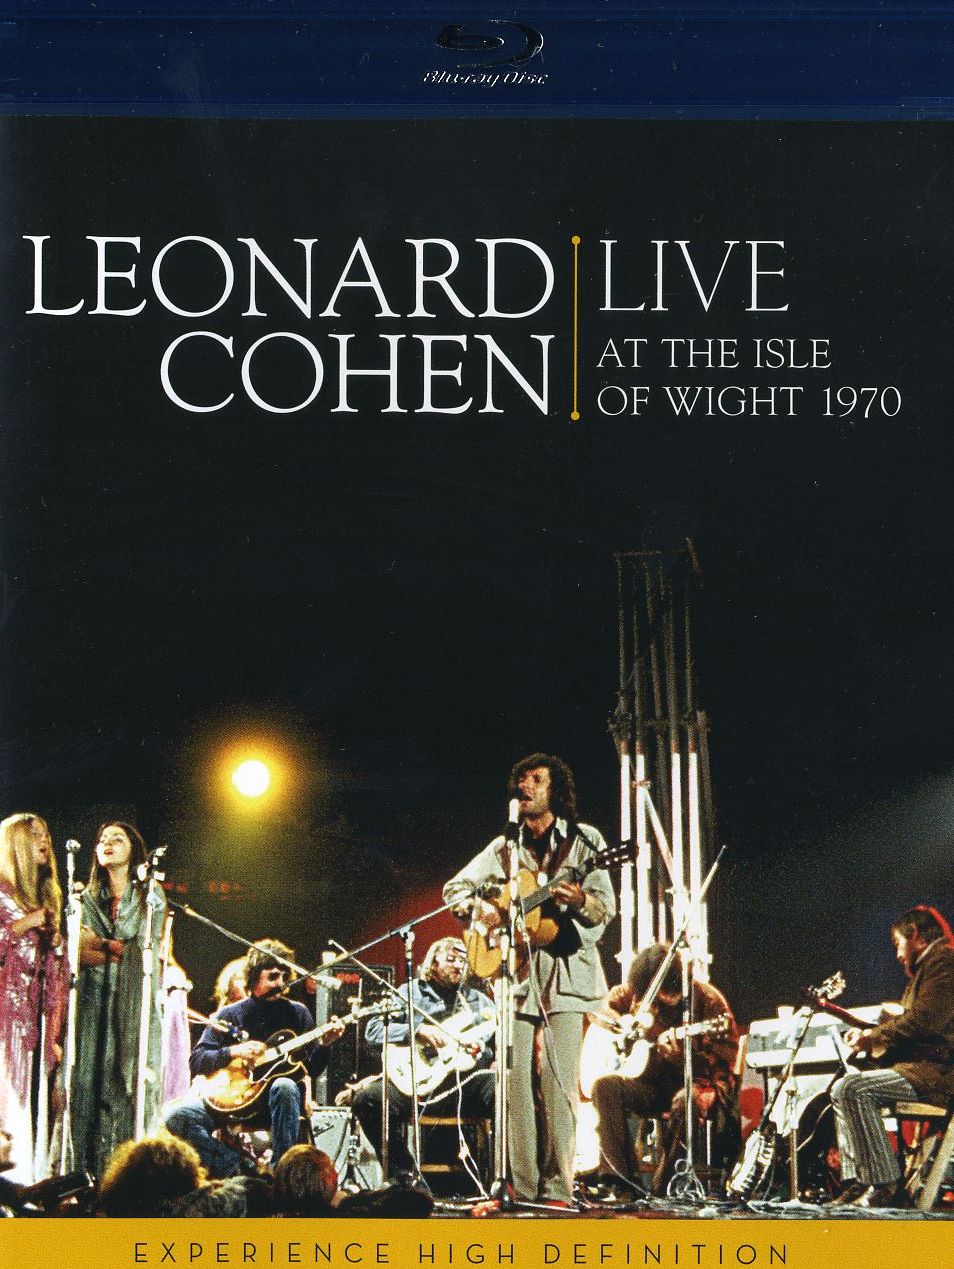 LEONARD COHEN LIVE AT THE ISLE OF WIGHT 1970